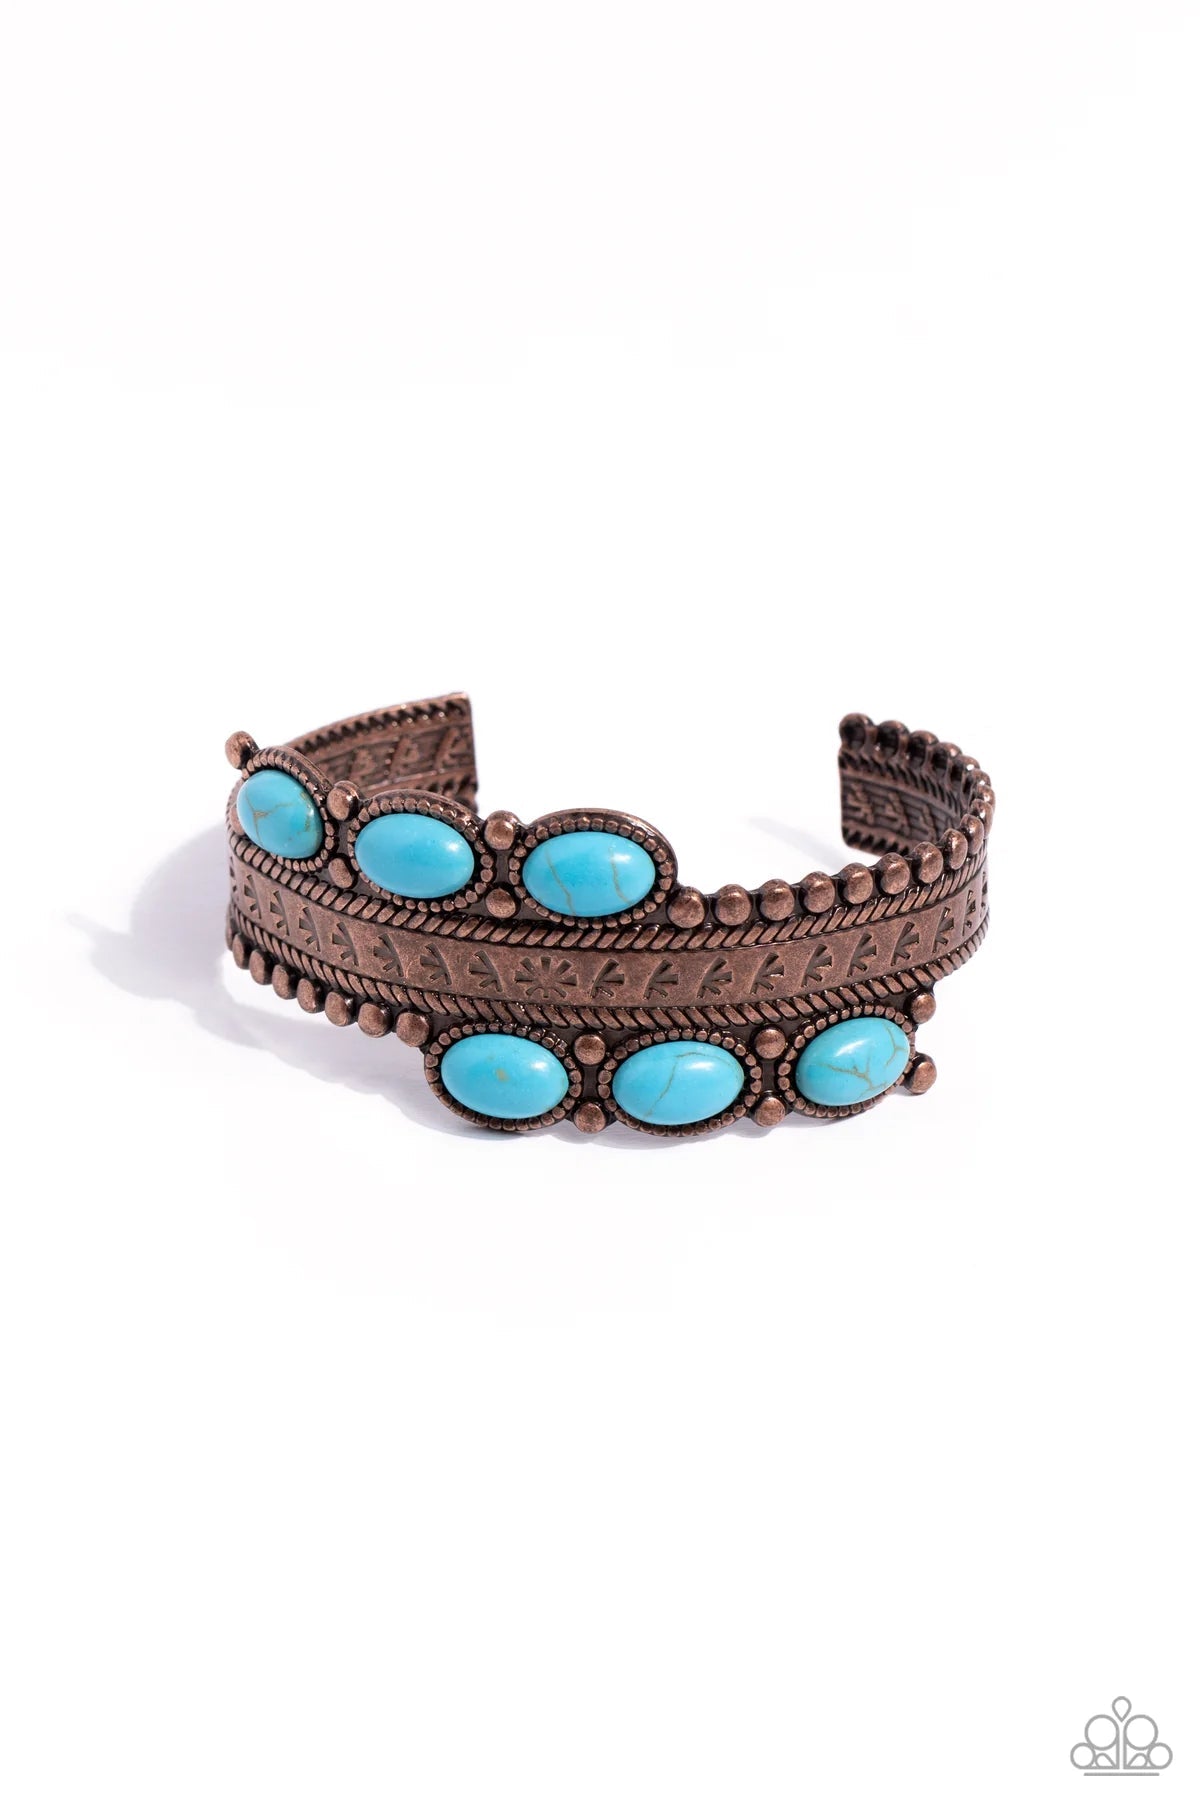 A League of Their STONE Copper Bracelet - Paparazzi Accessories- lightbox - CarasShop.com - $5 Jewelry by Cara Jewels